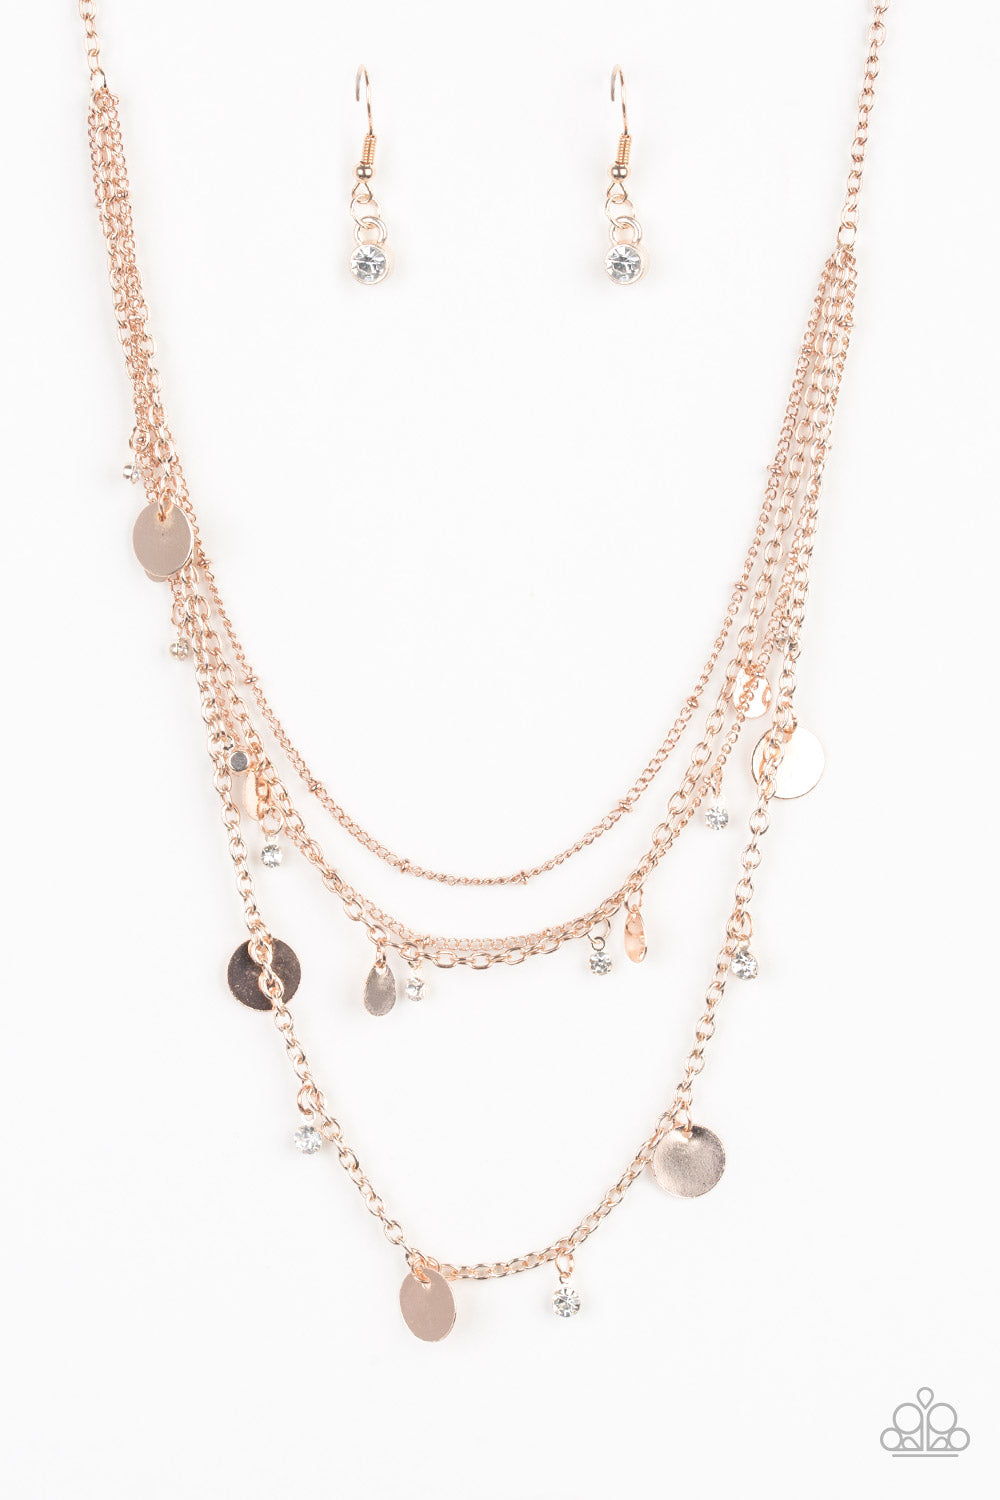 Classic Class Act - Rose Gold Necklace Set